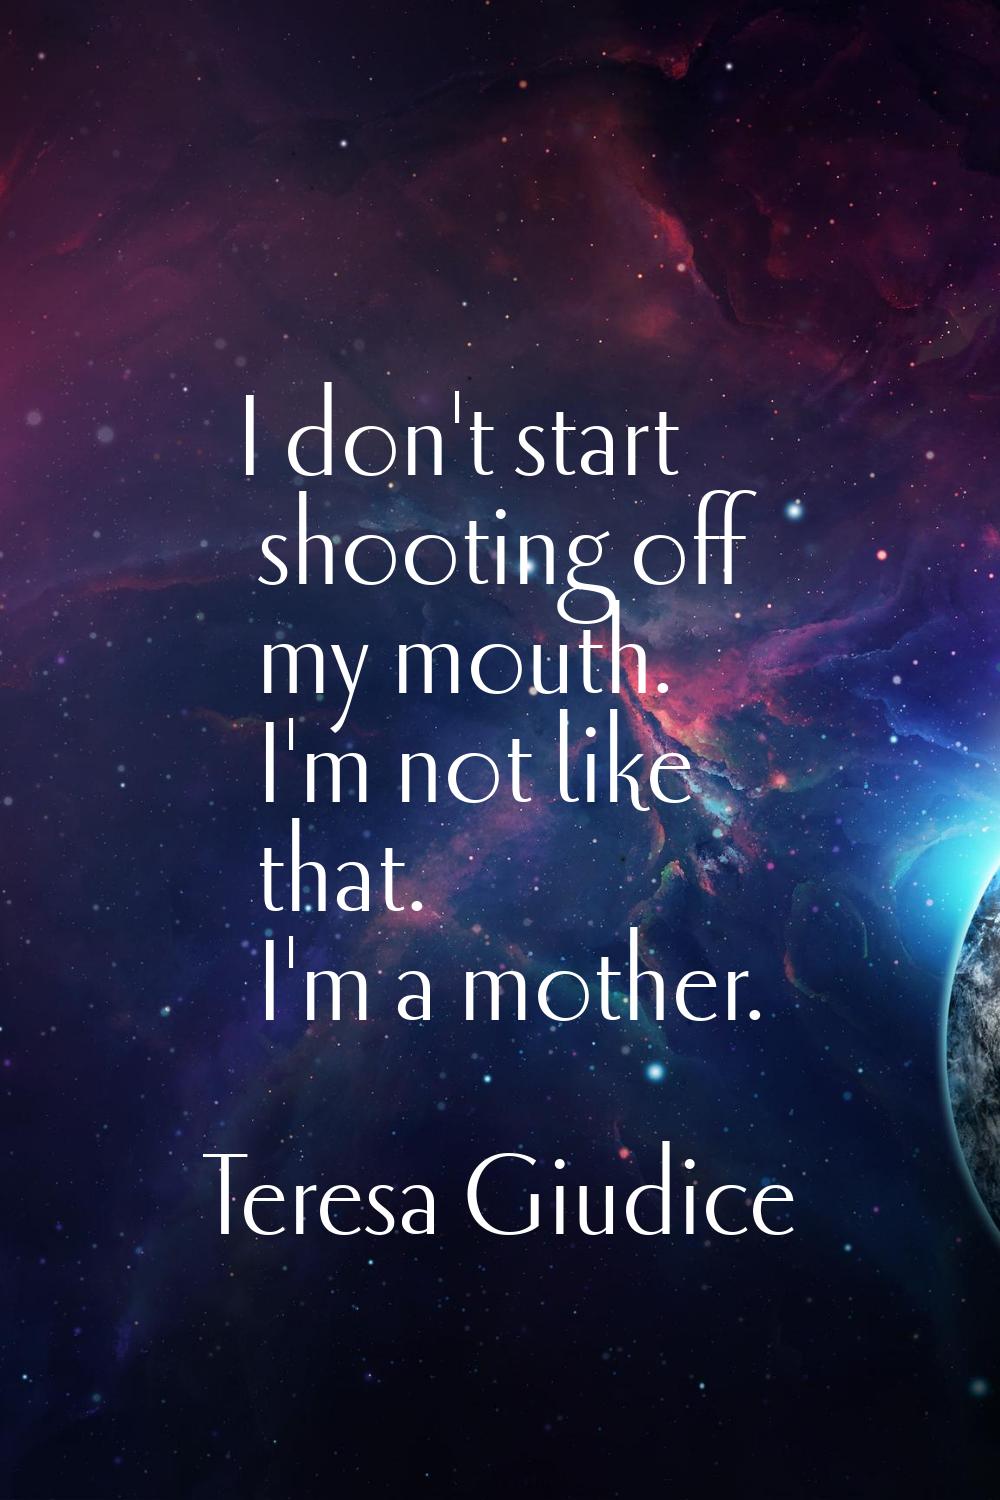 I don't start shooting off my mouth. I'm not like that. I'm a mother.